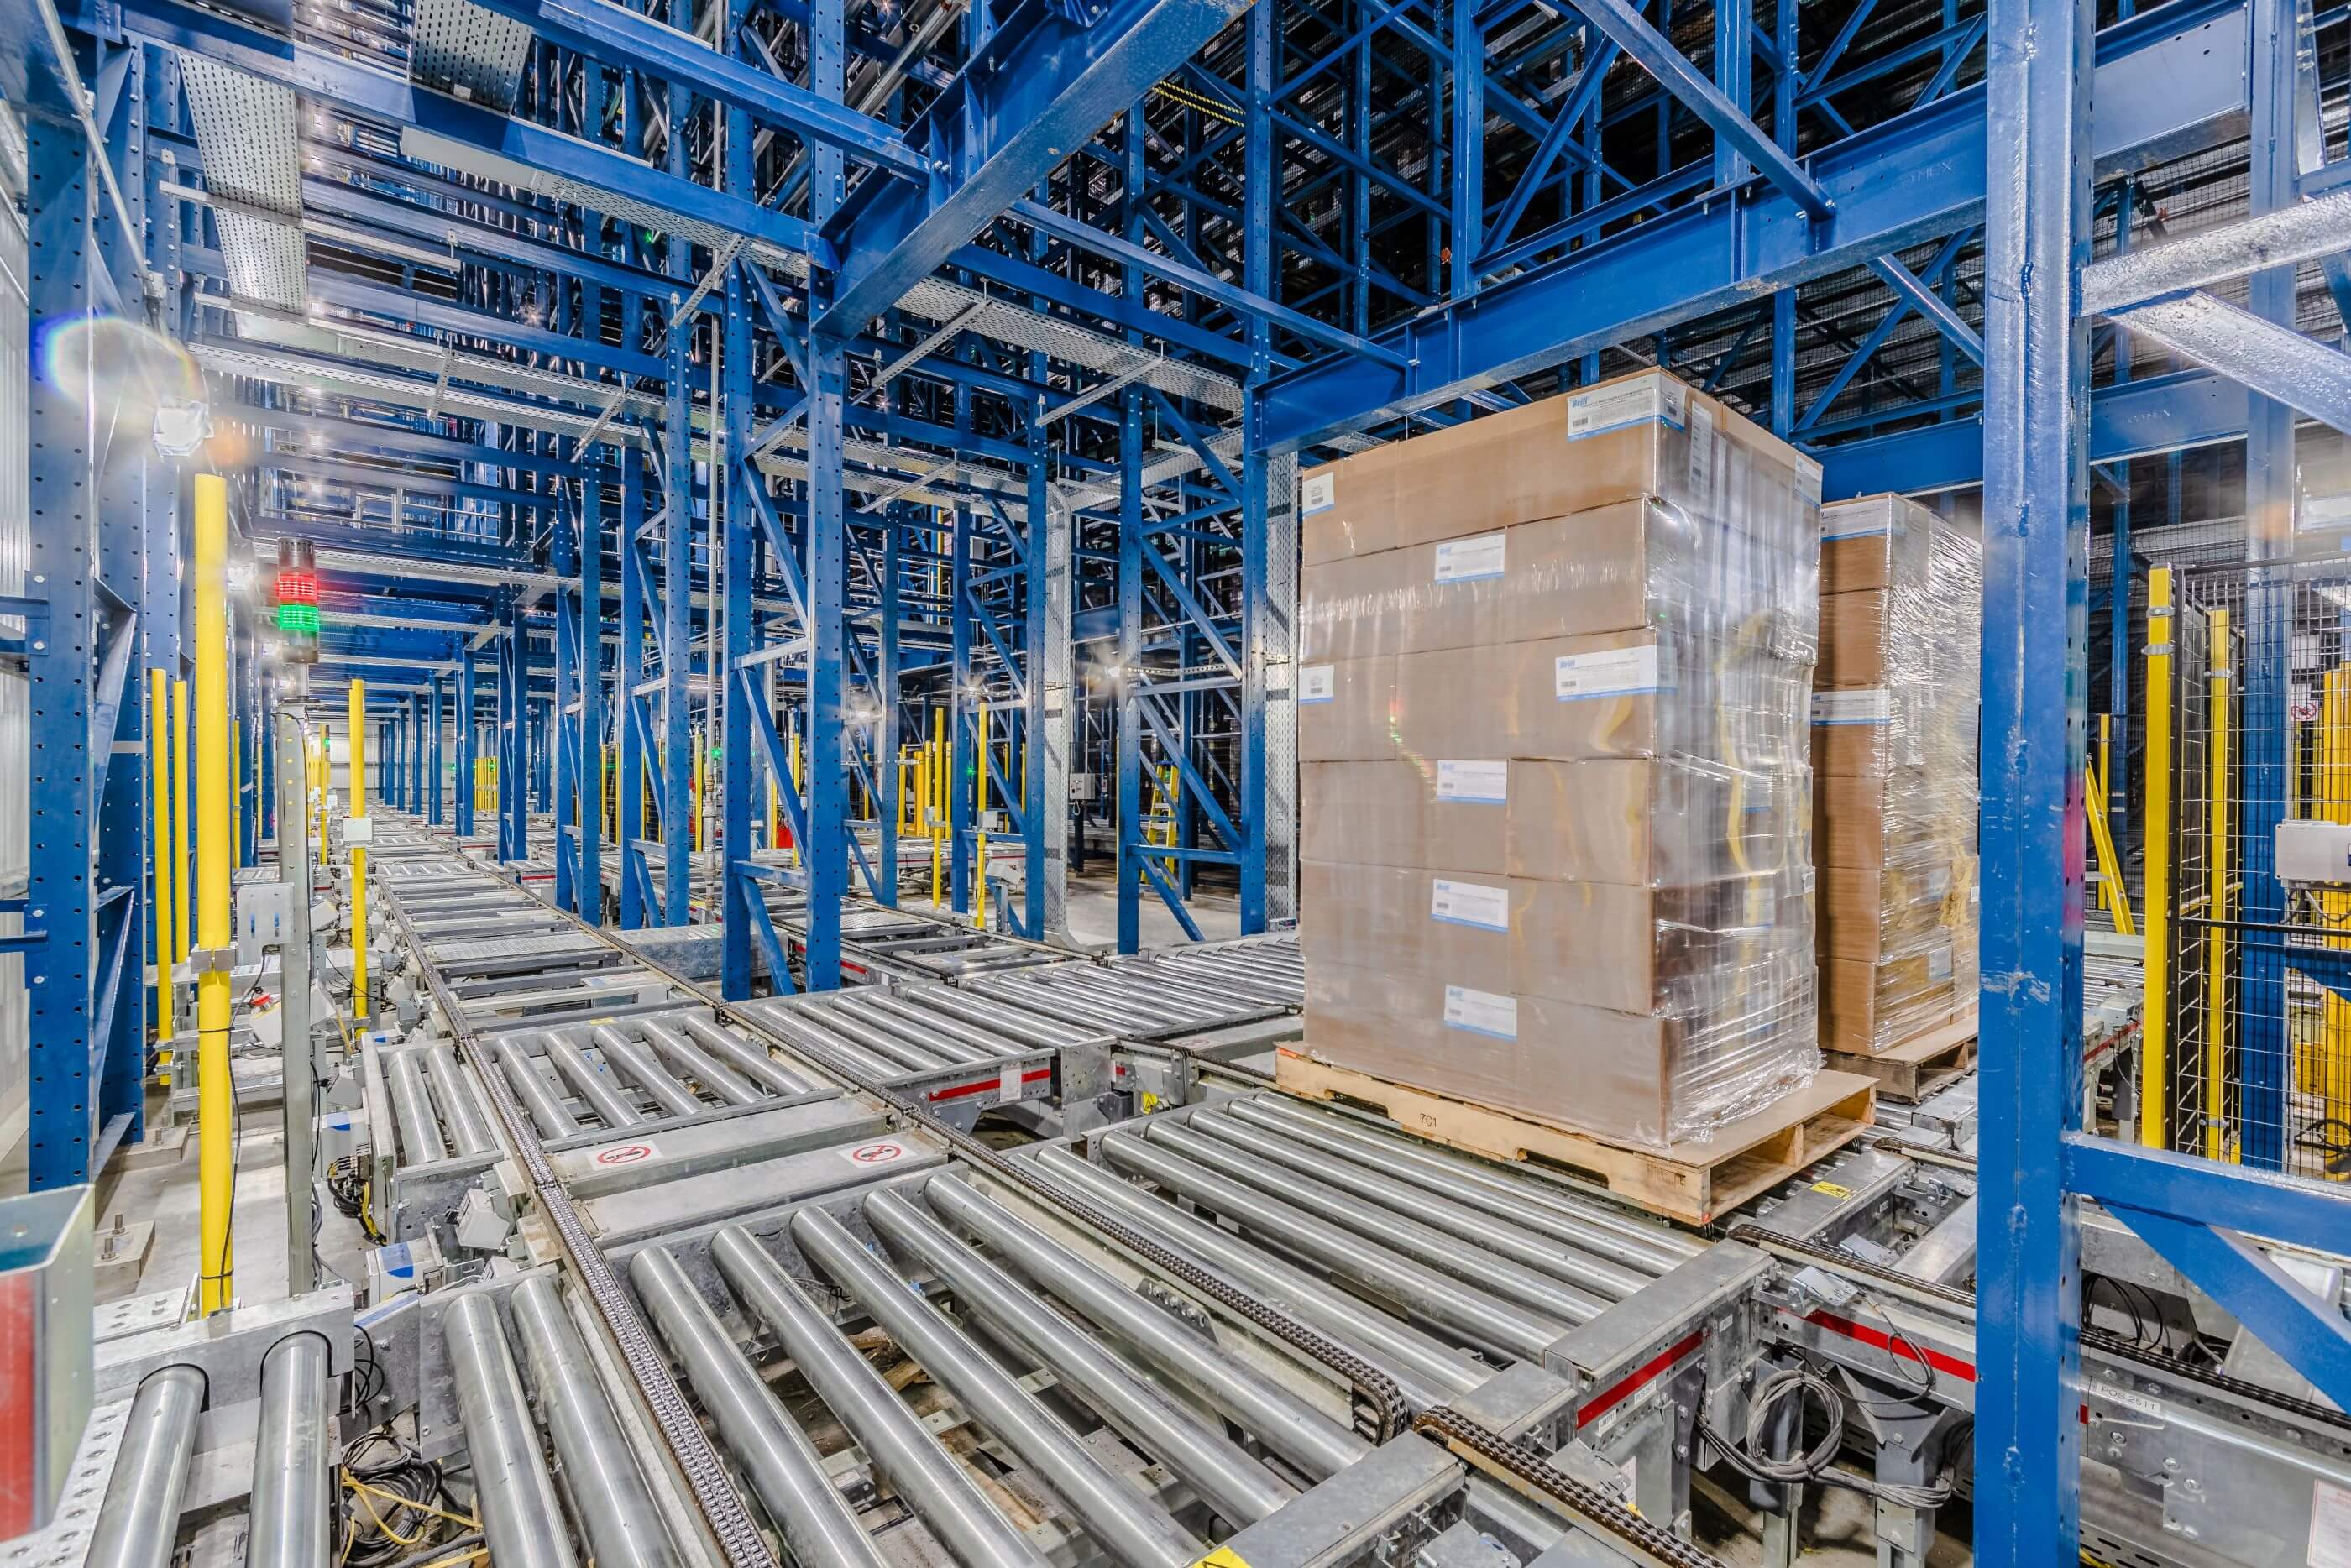 Lineage Sunnyvale automated warehouse interior with conveyor belts transporting shrink-wrapped pallets, flanked by tall blue steel racks.